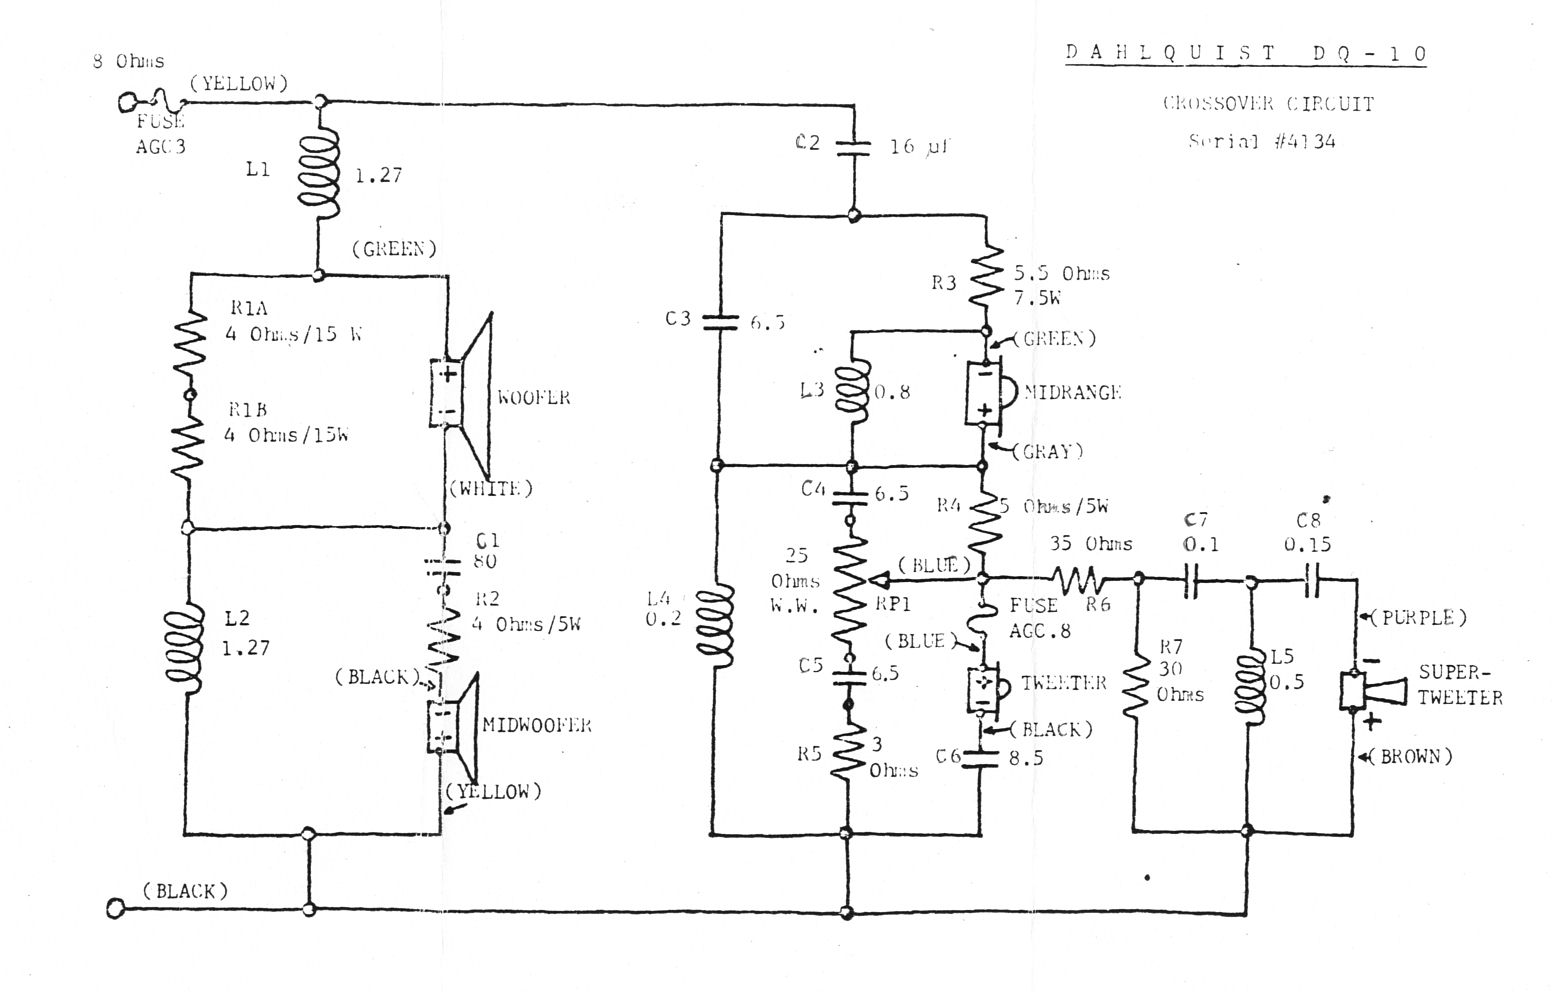 Dahlquist DQ10 crossover schematic??? - Other Speakers and ... subwoofer wiring diagram ohms 